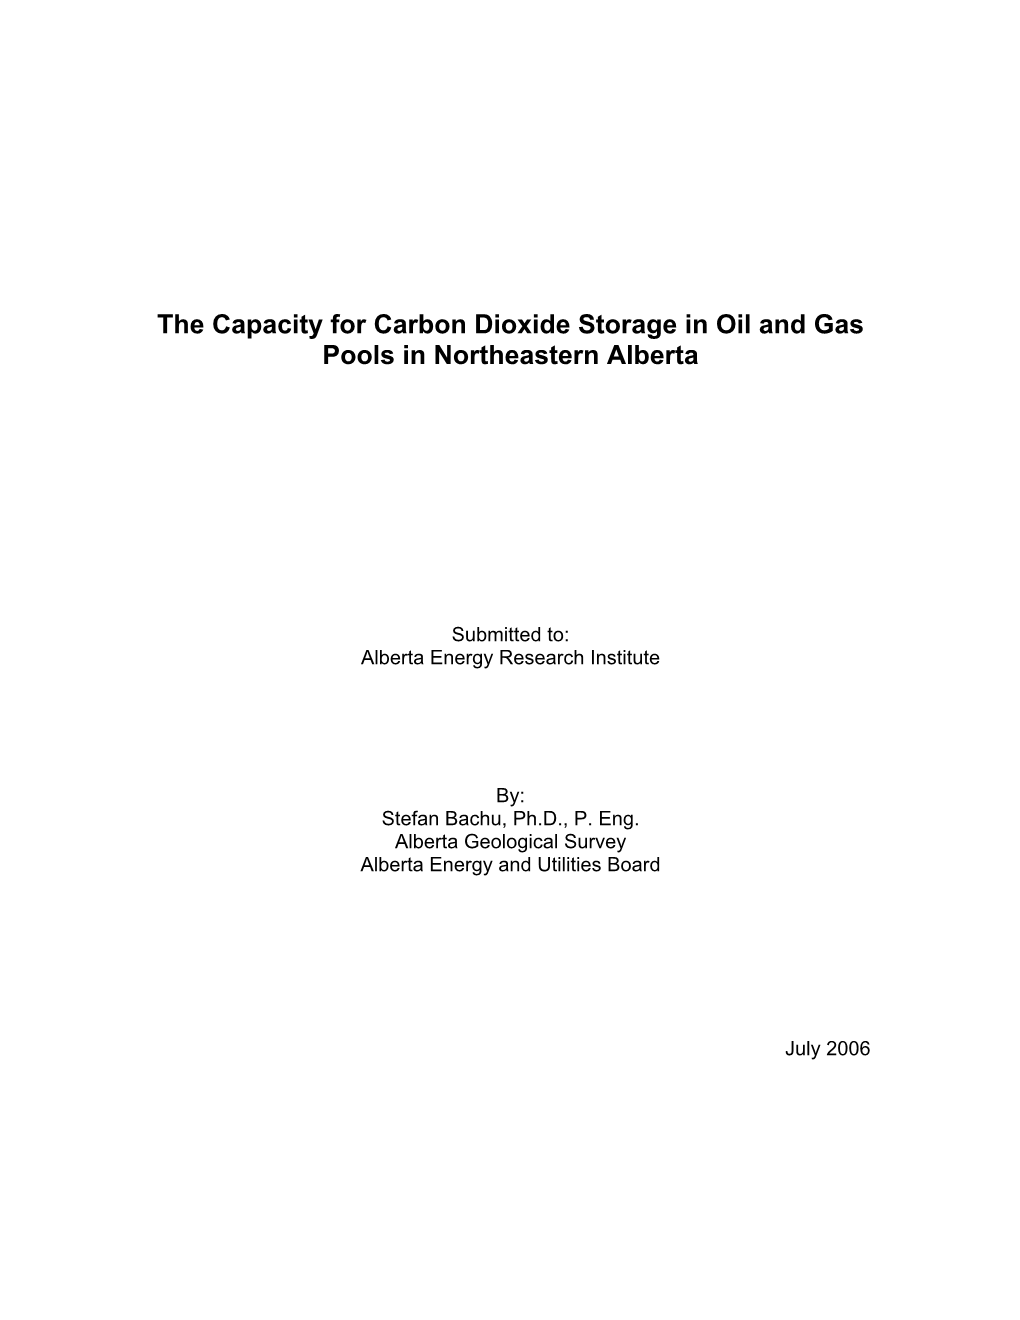 The Capacity for Carbon Dioxide Storage in Oil and Gas Pools in Northeastern Alberta